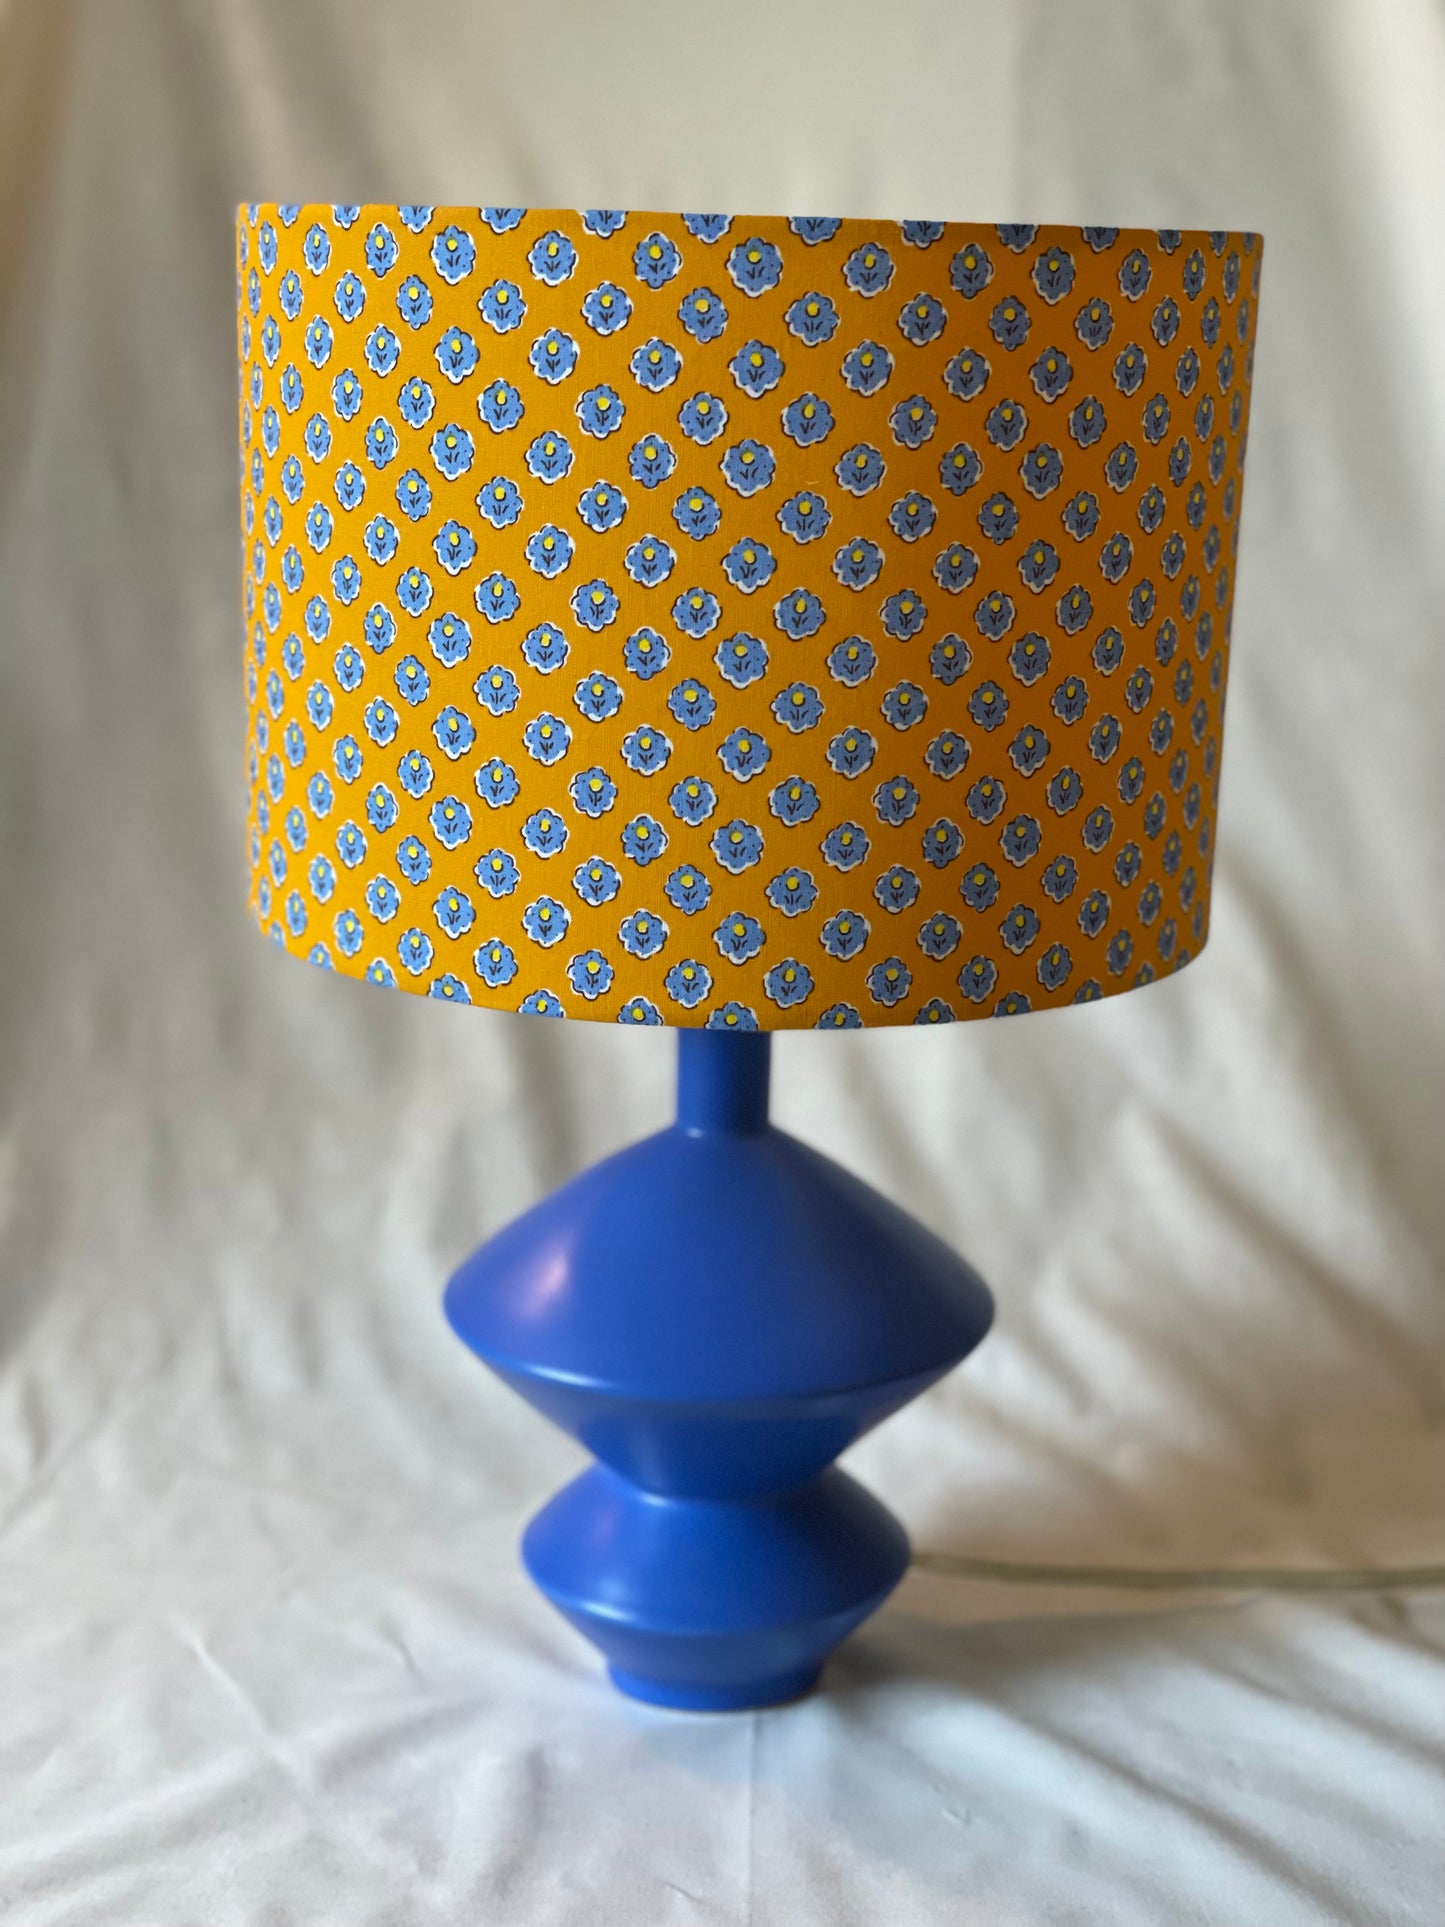 10 inch Drum Lampshade. Vintage French Fabric. Mustardy Yellow with French Blue and Pale Yellow Floral Motif.